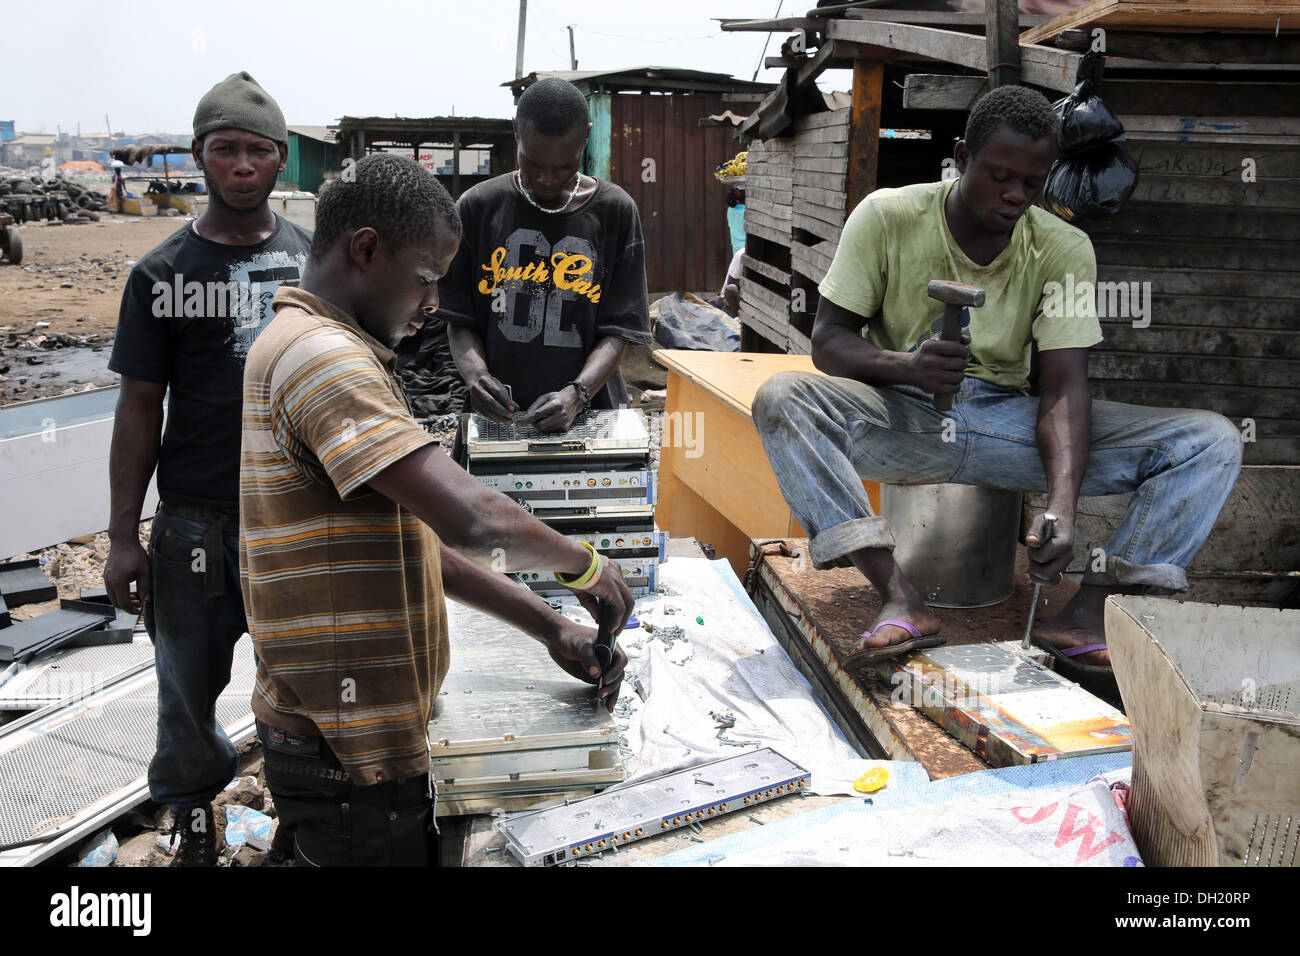 Teenage boys dismantle computer servers and other electronics to recover copper near the Agbogbloshie slum in Accra, Ghana Stock Photo